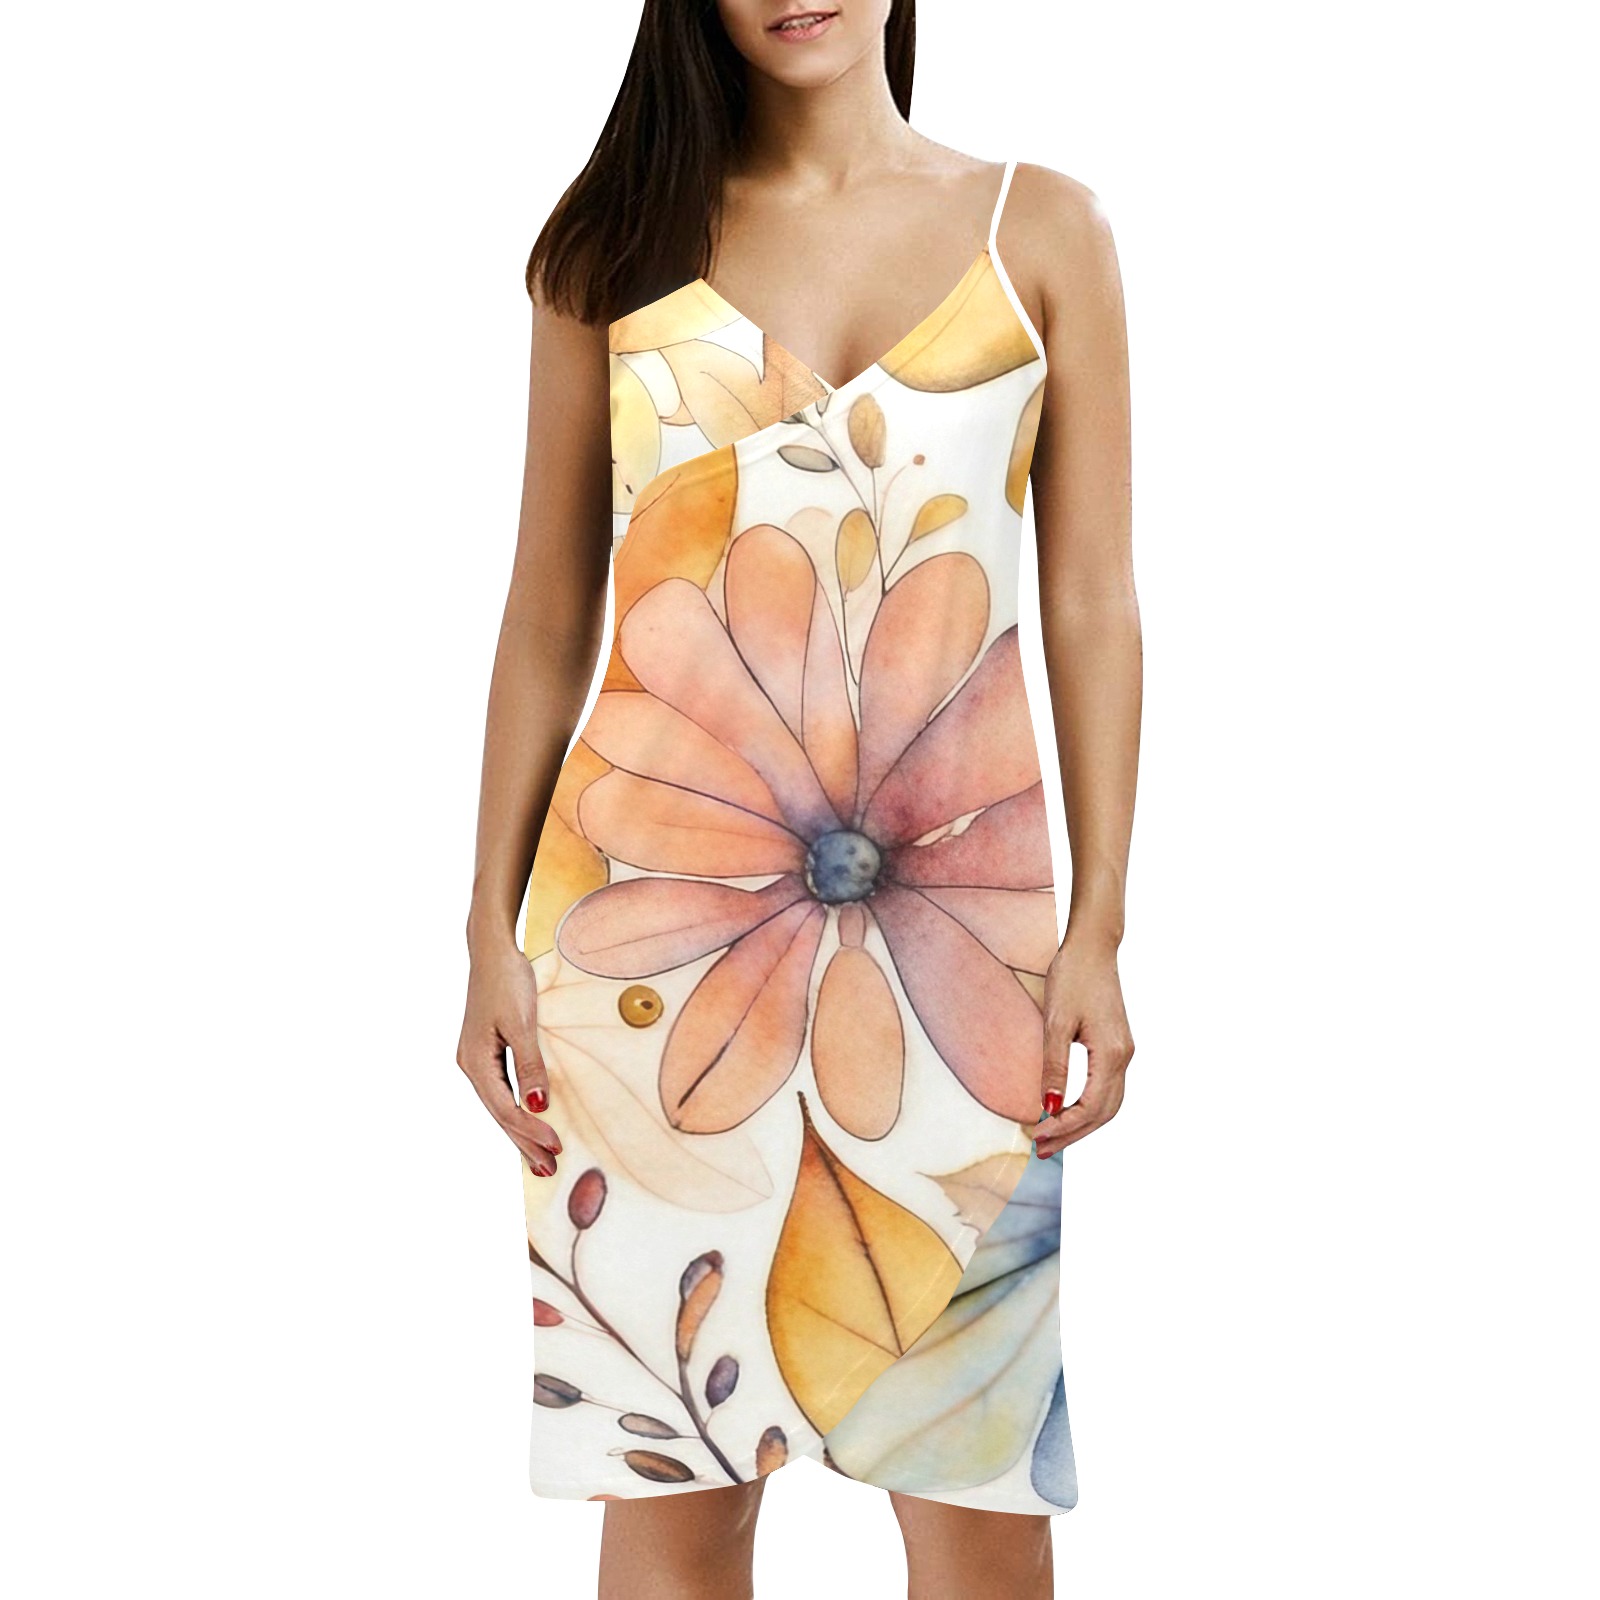 Watercolor Floral 2 Spaghetti Strap Backless Beach Cover Up Dress (Model D65)